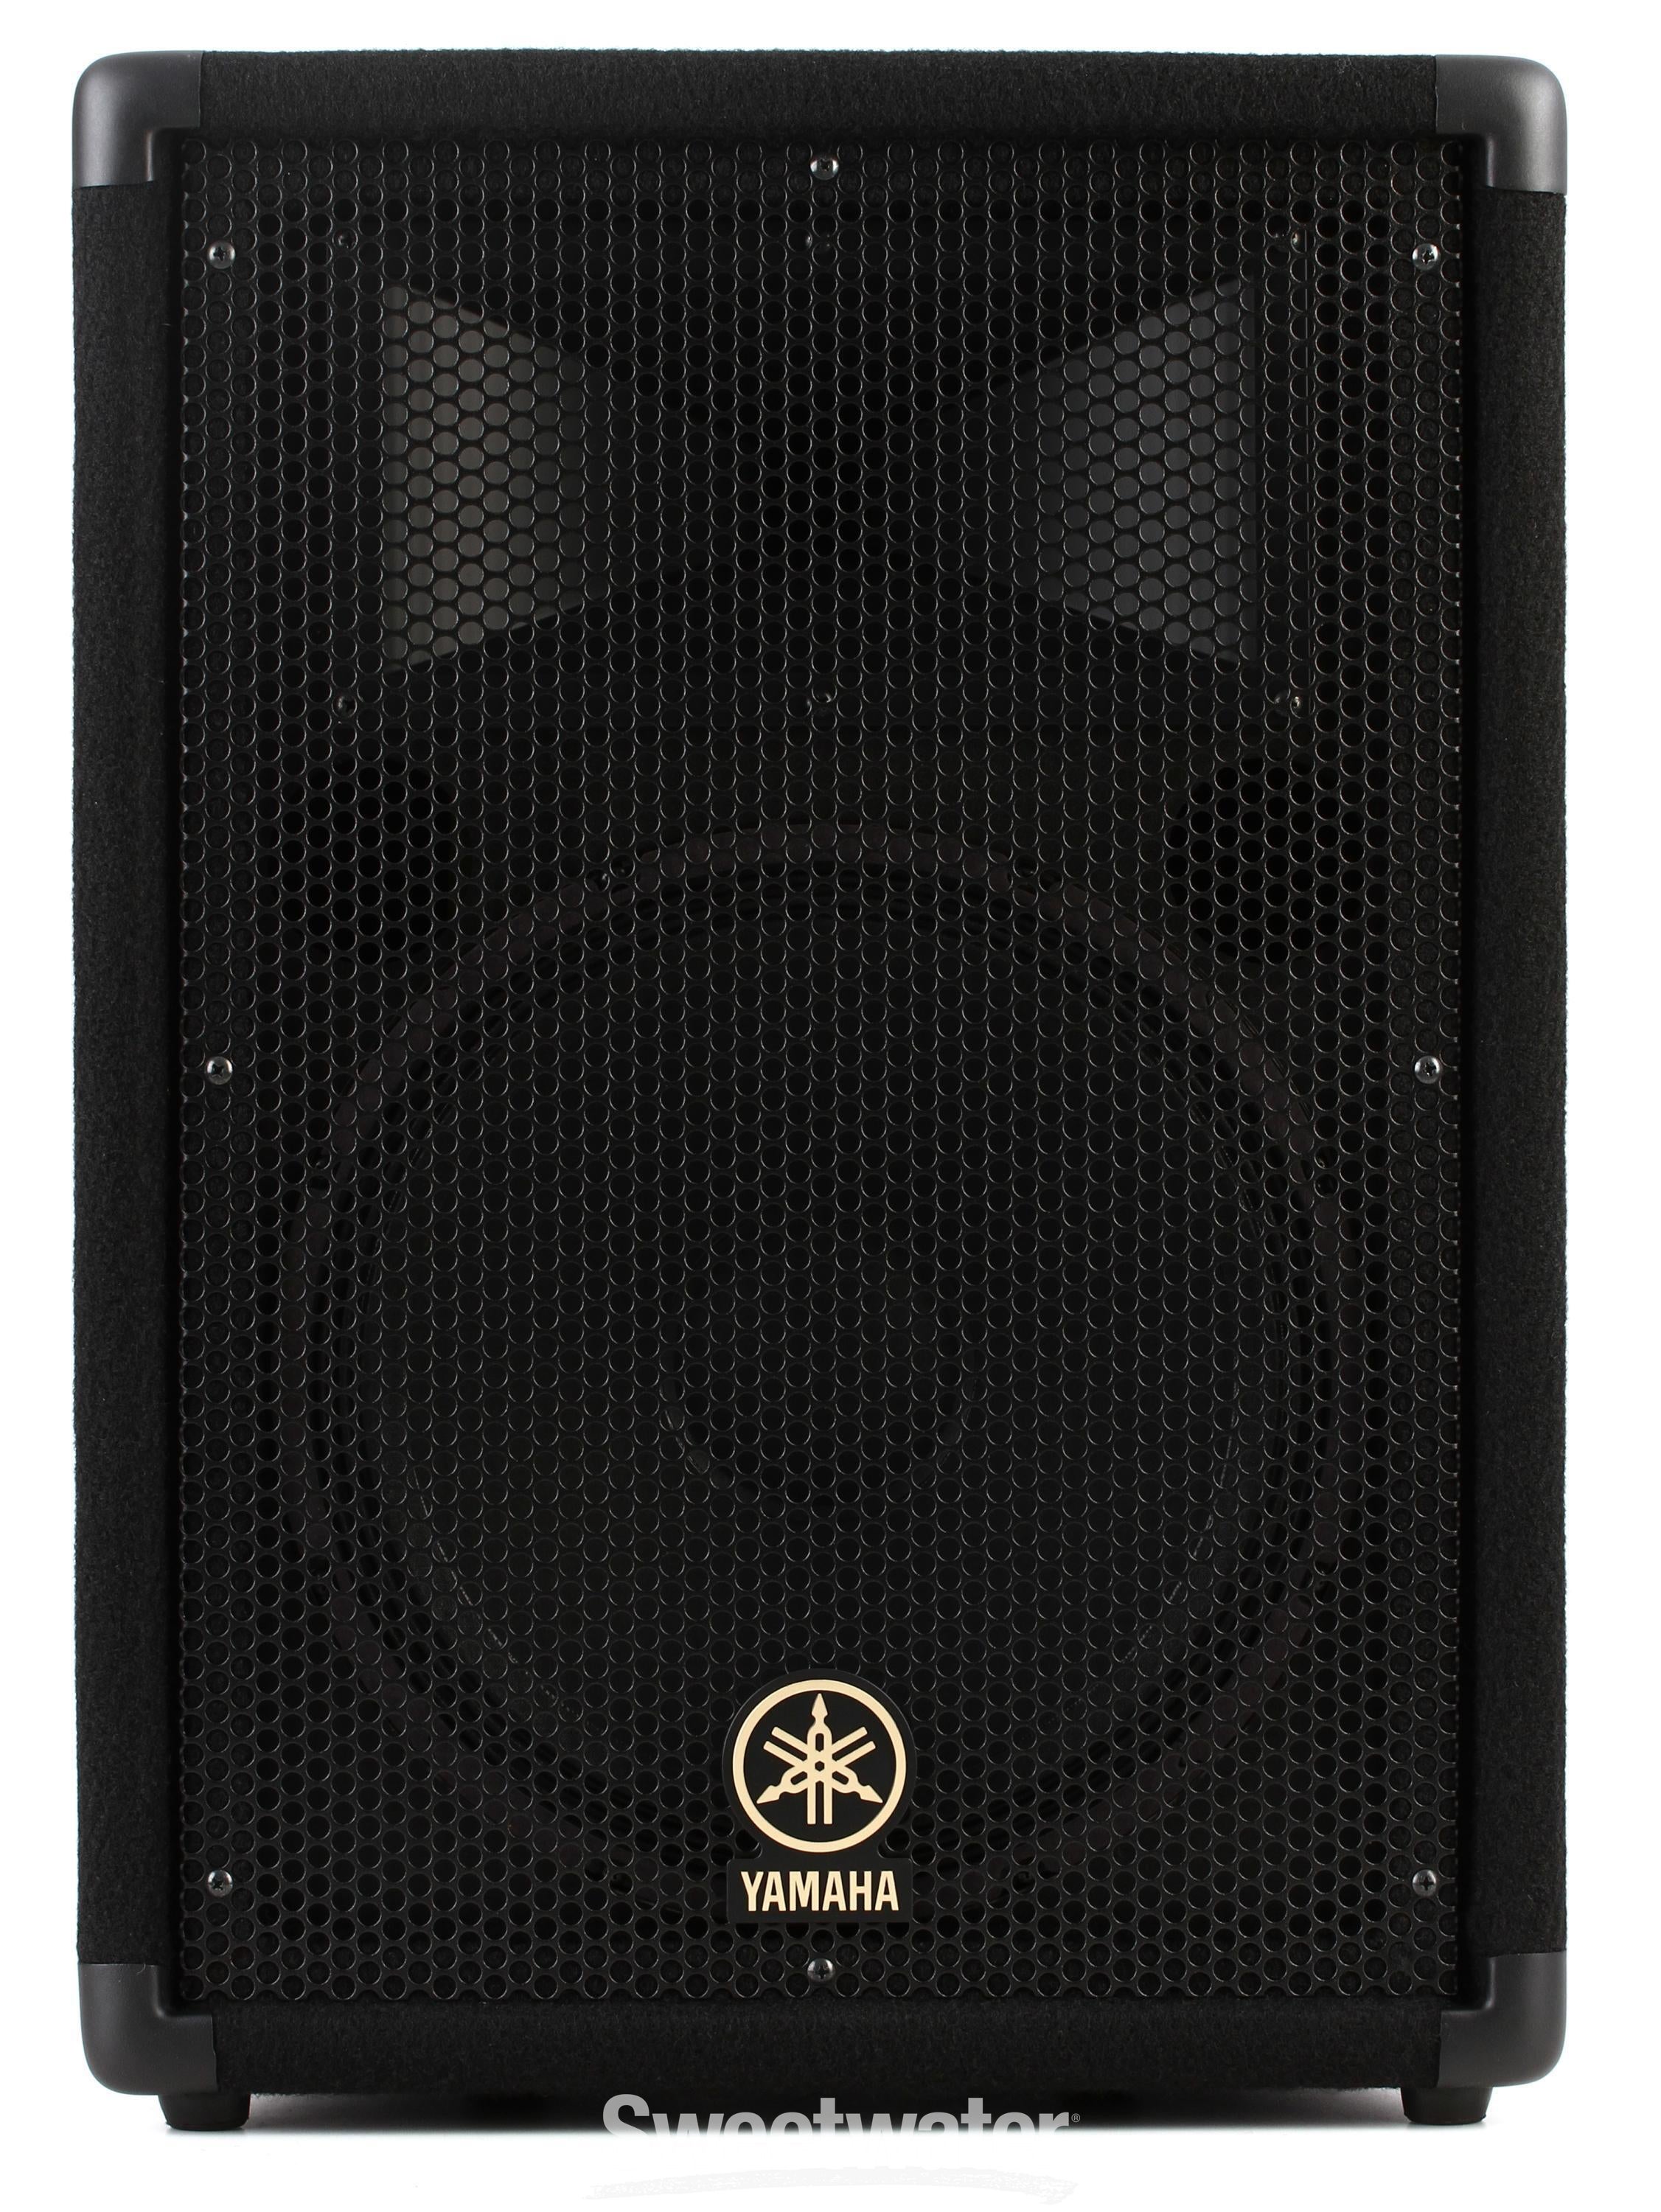 Yamaha BR12 600W 12 inch Passive Speaker | Sweetwater